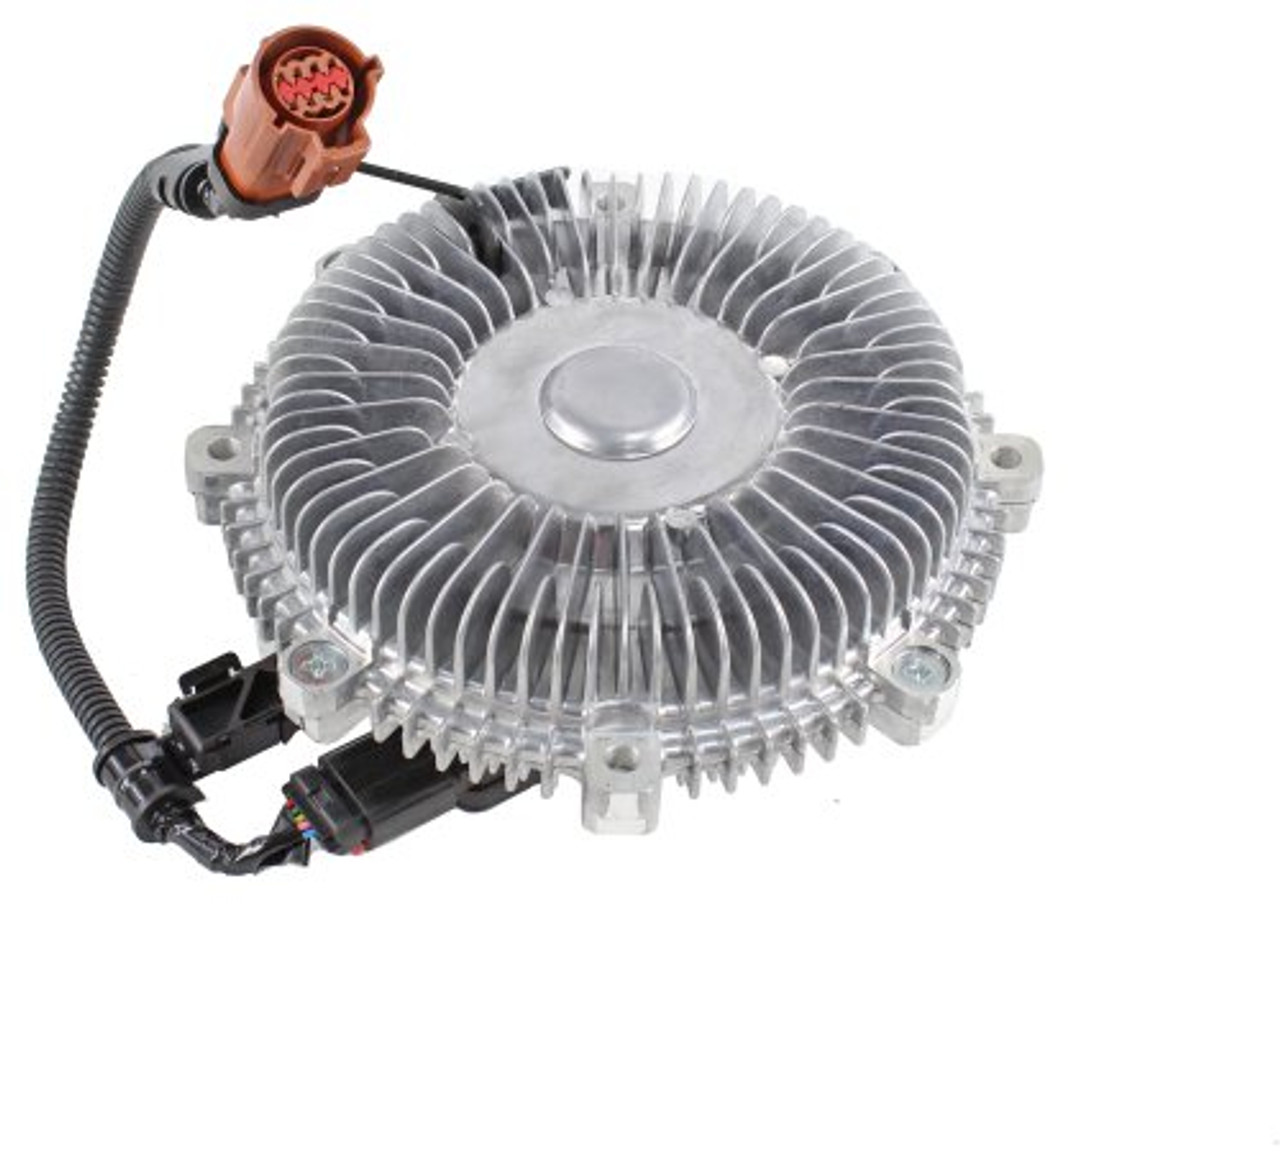 Cooling Fan Clutch - 2008 Ford Expedition 5.4L Engine Parts # FCA1003EZE2